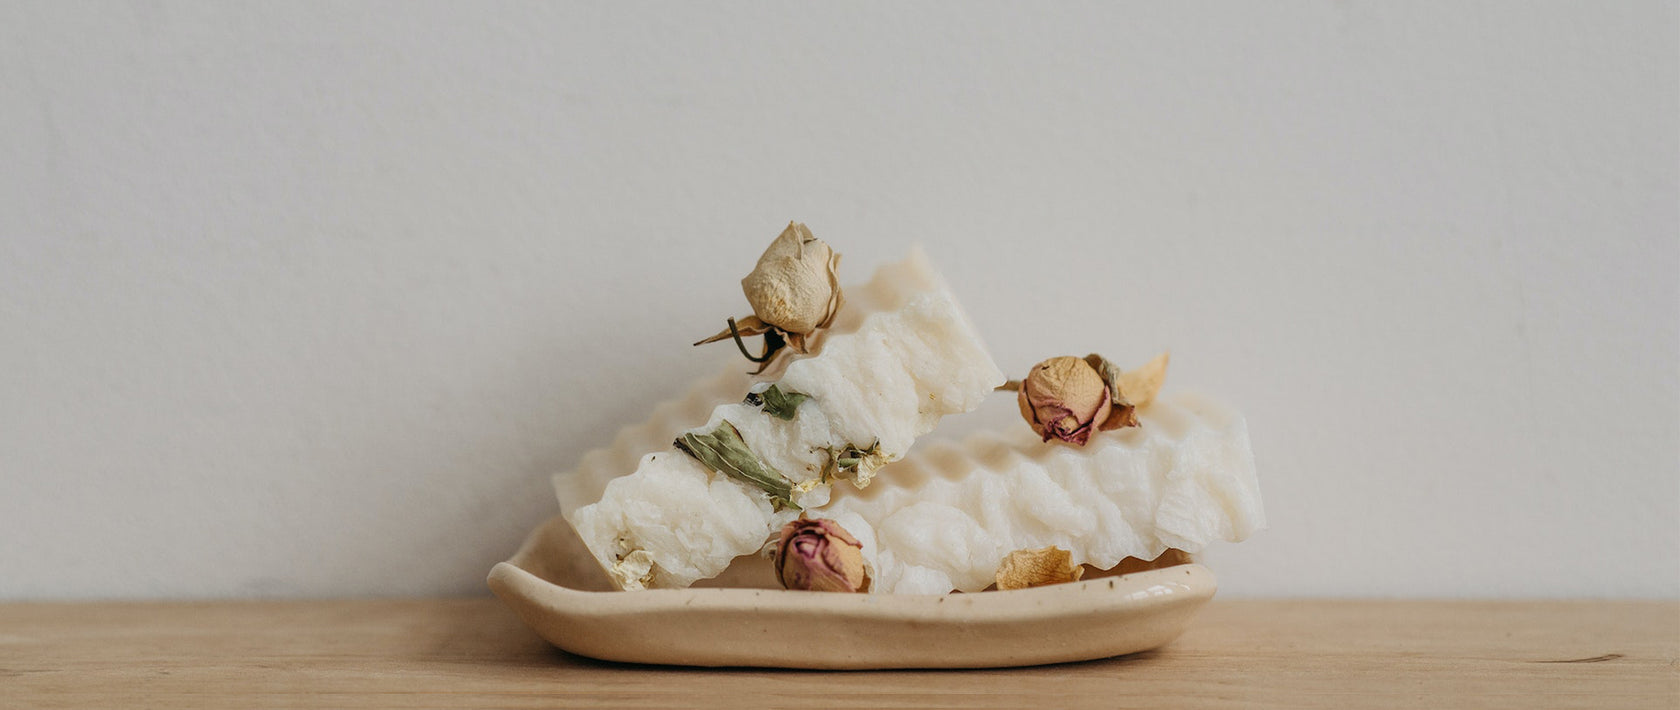 Handmade, natural artisanal soaps and body care